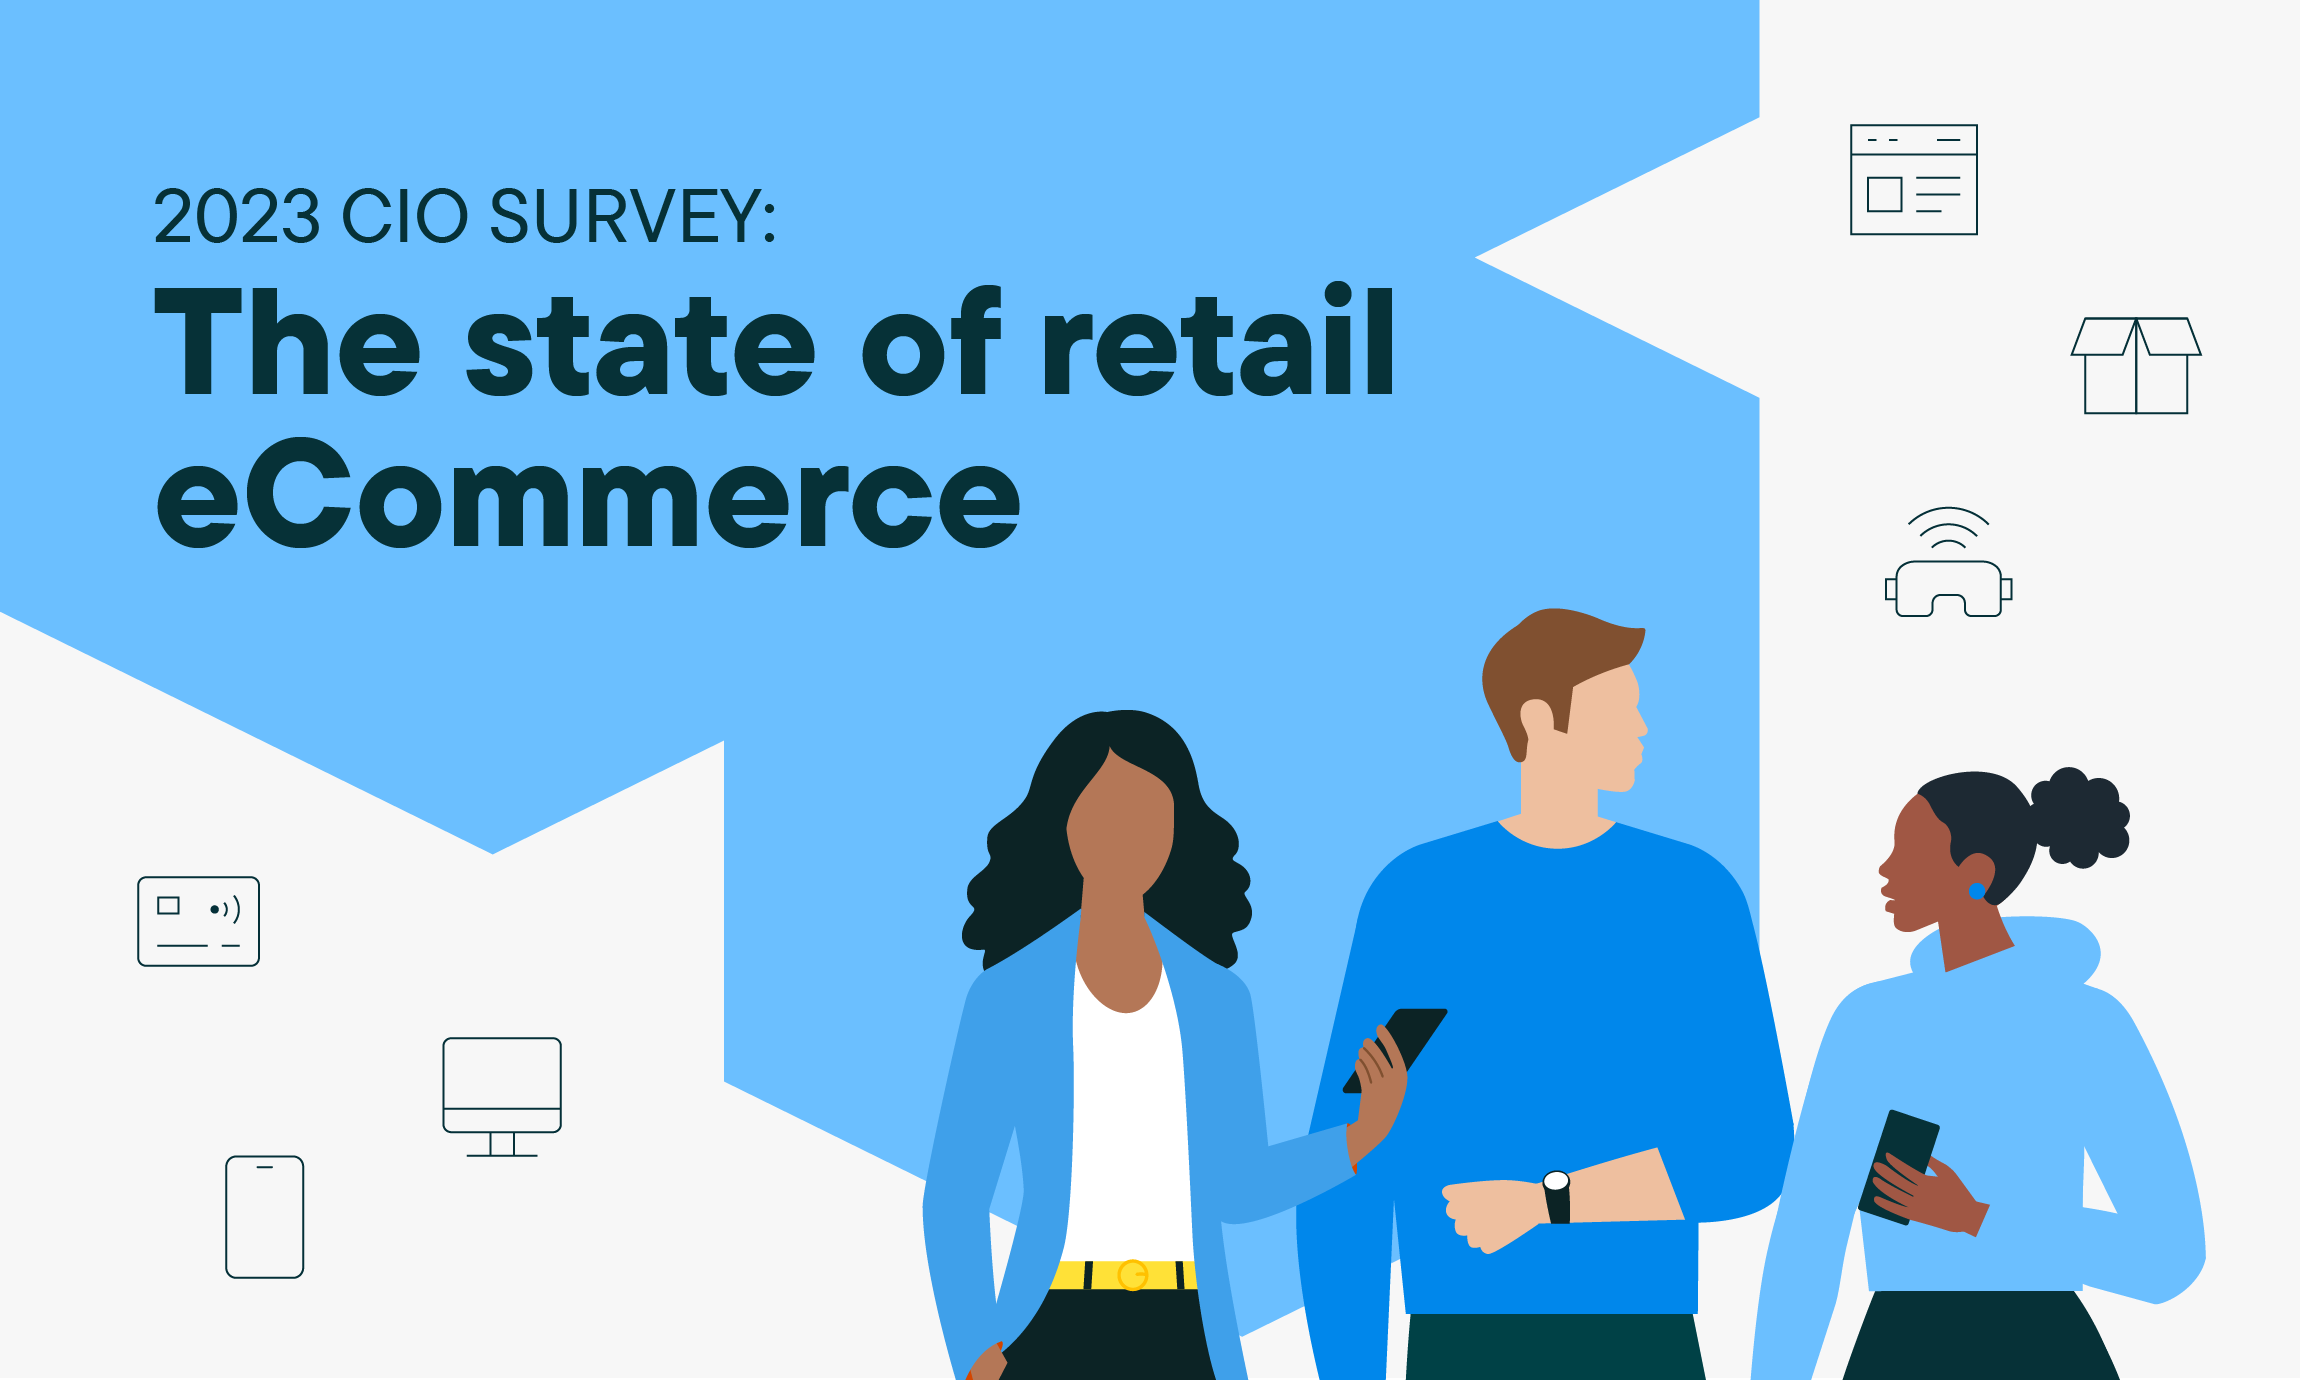 The most important retail eCommerce statistics by CIO